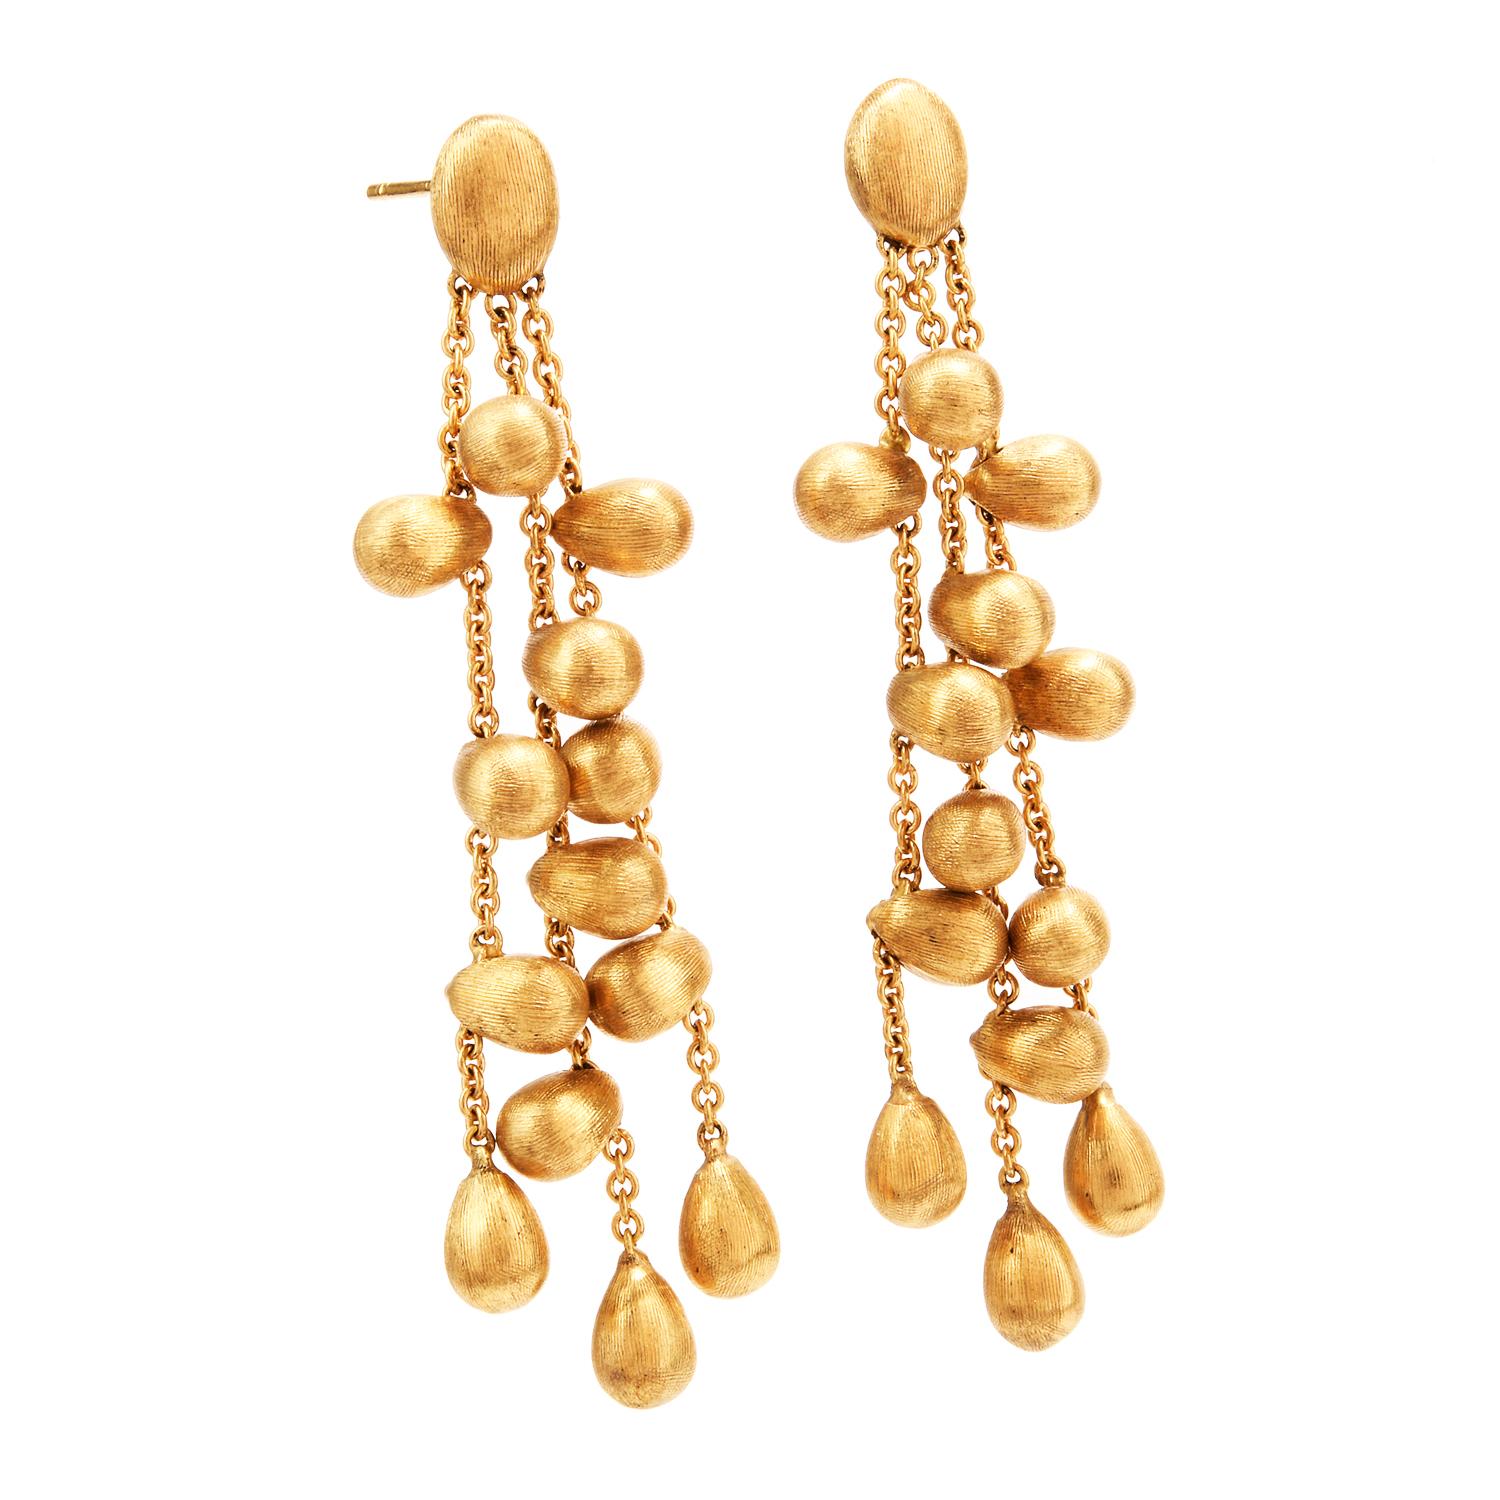 Designer Marco Bicego  was inspired by Drops of Gold with these 18K Chandelier Earrings.

3 strands of cable chain feature Satin finished drops of gold throughout.  The drops measure on average appx. 4.5 x 6.0mm.

Measuring appx. 2 Inches in length,